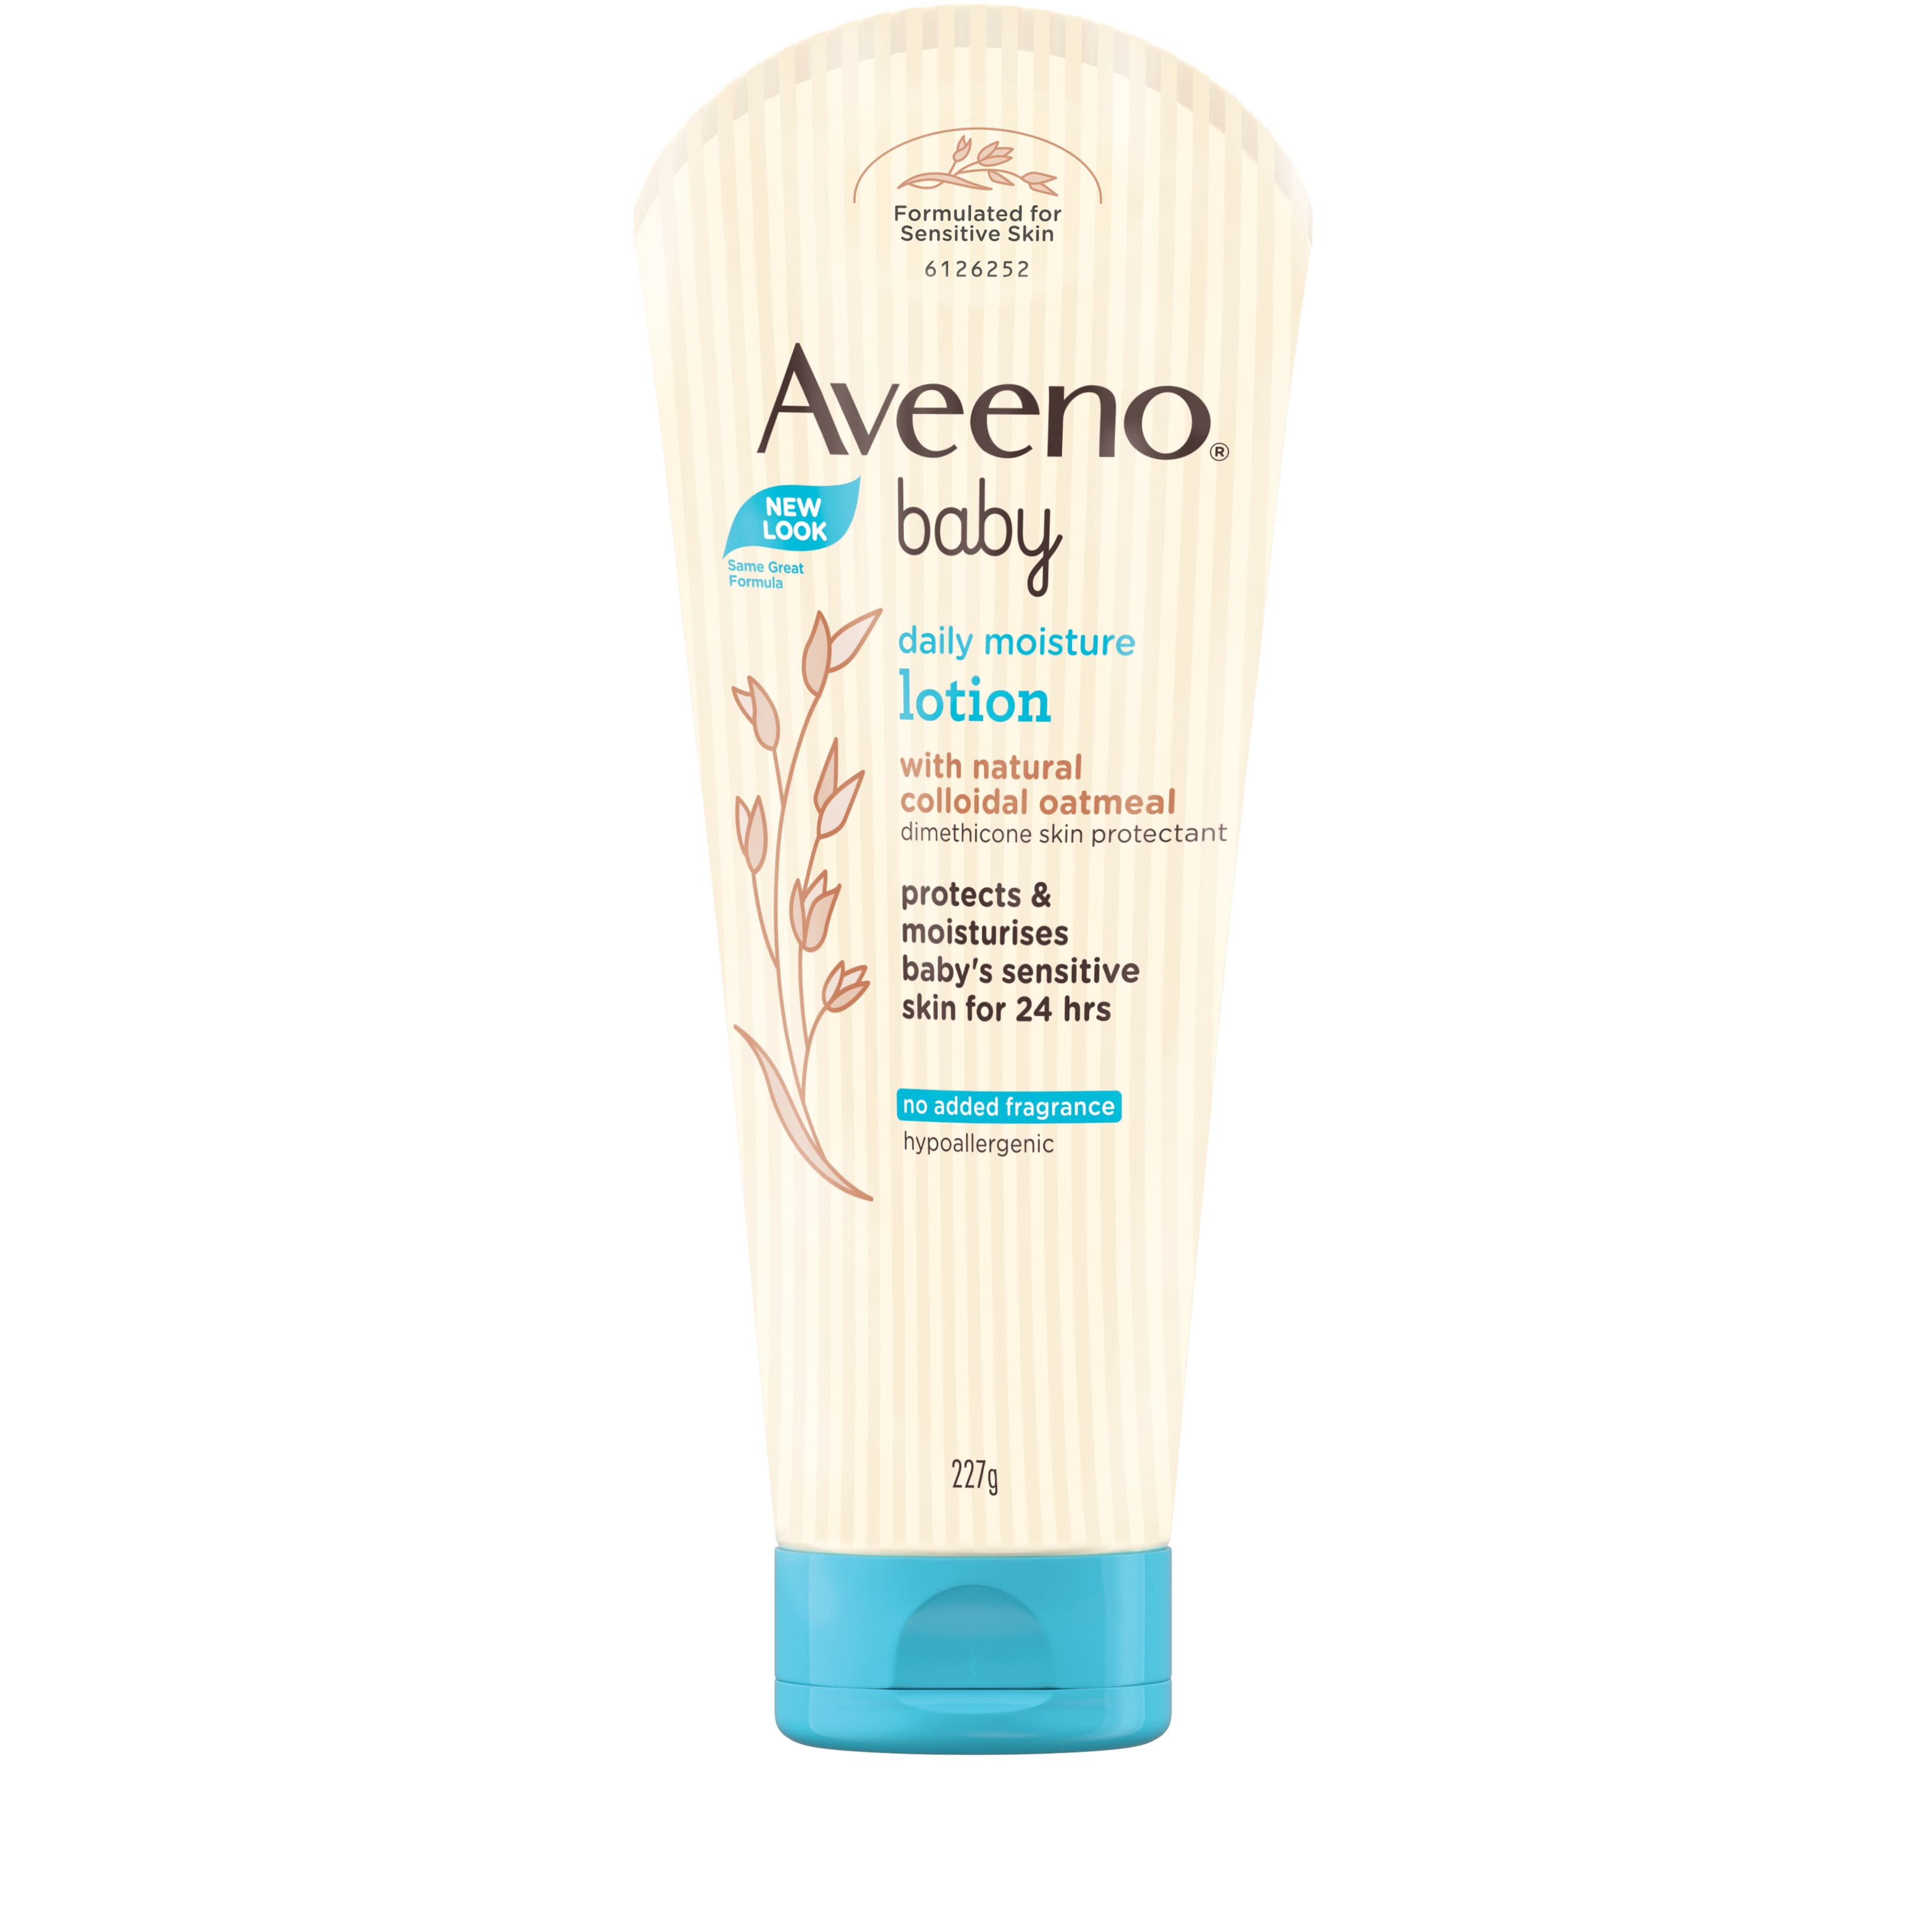 new-aveeno-baby-daily-moisture-lotion-227g-front